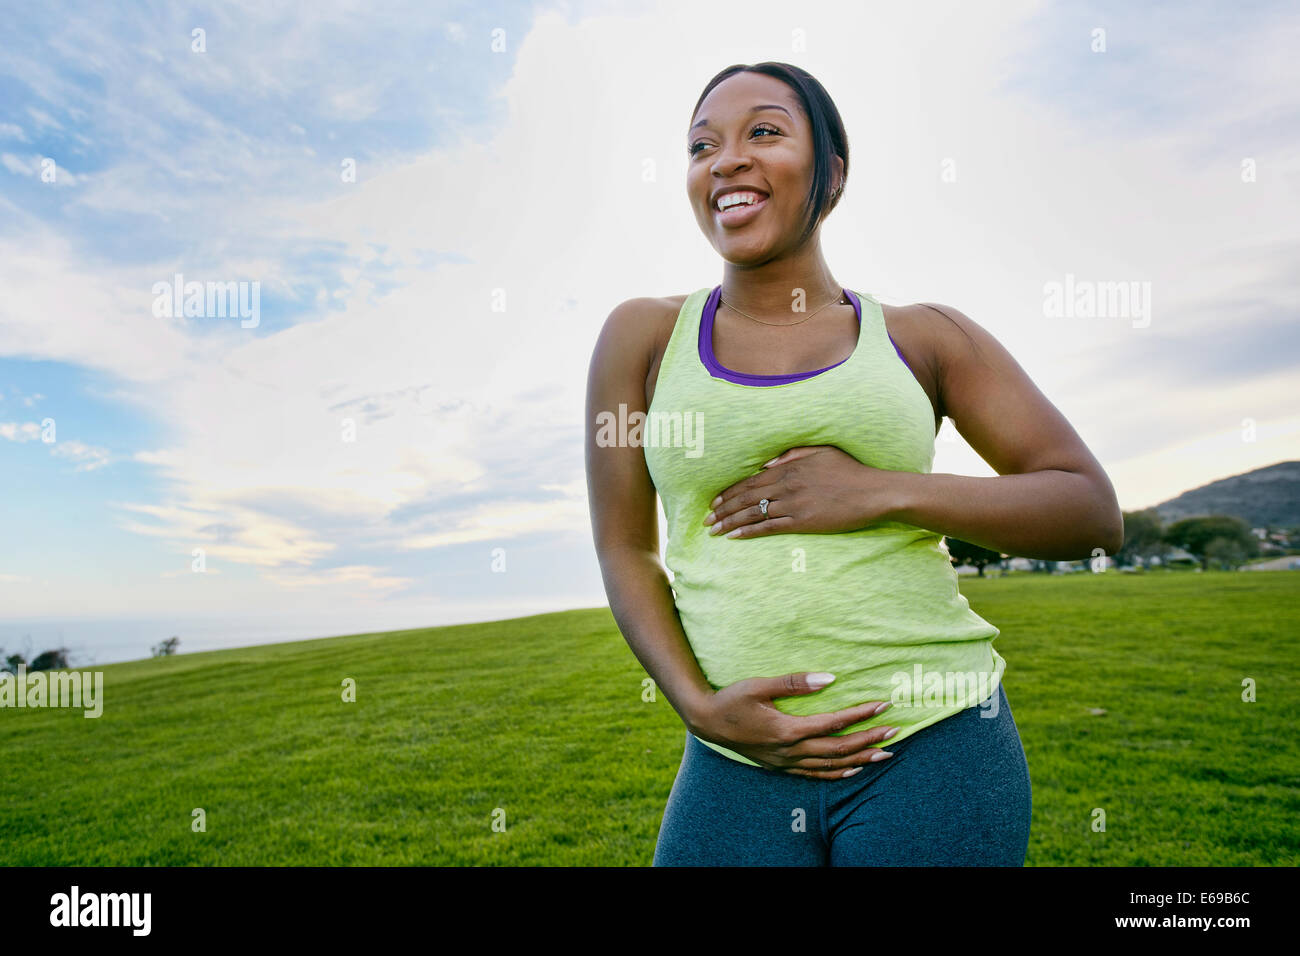 Pregnant woman laughing in park Stock Photo